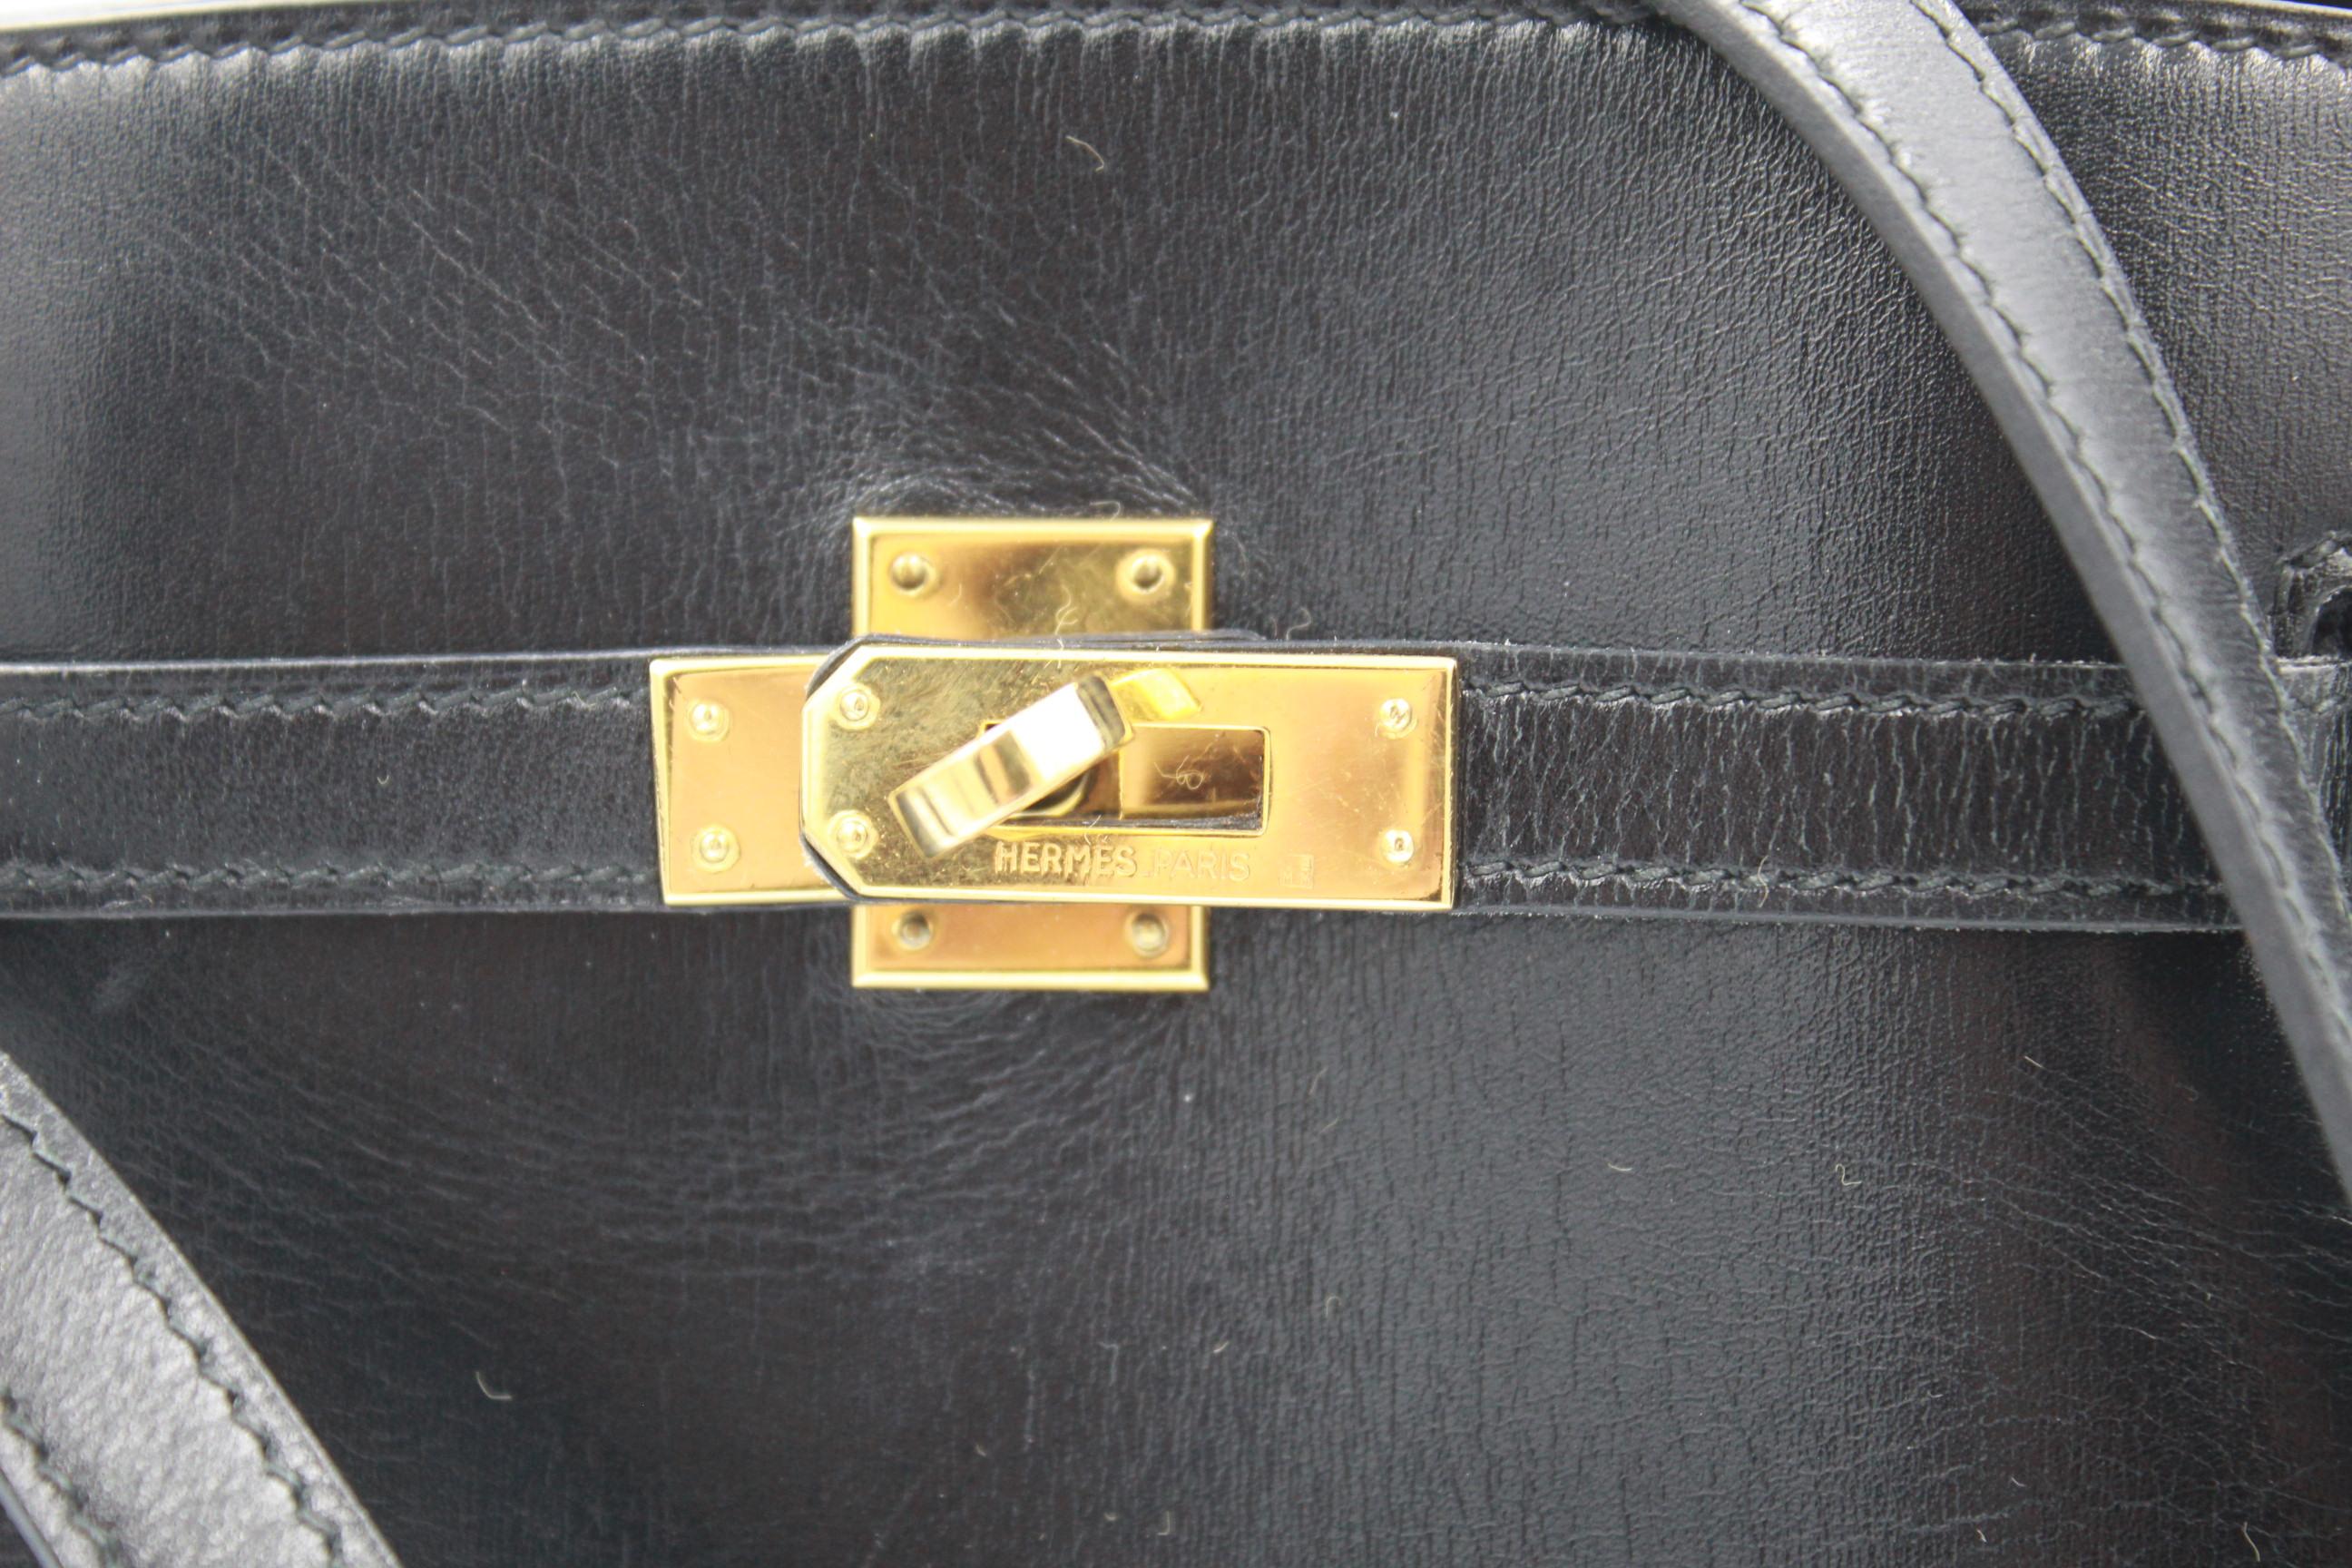 Vintage Hermes Mini Kelly Sport in Black box leather and golden hardware.
Good vintage condition, no major sign of wear but some light signs of use.
Can be worn crossbody
Size 20*23 cm